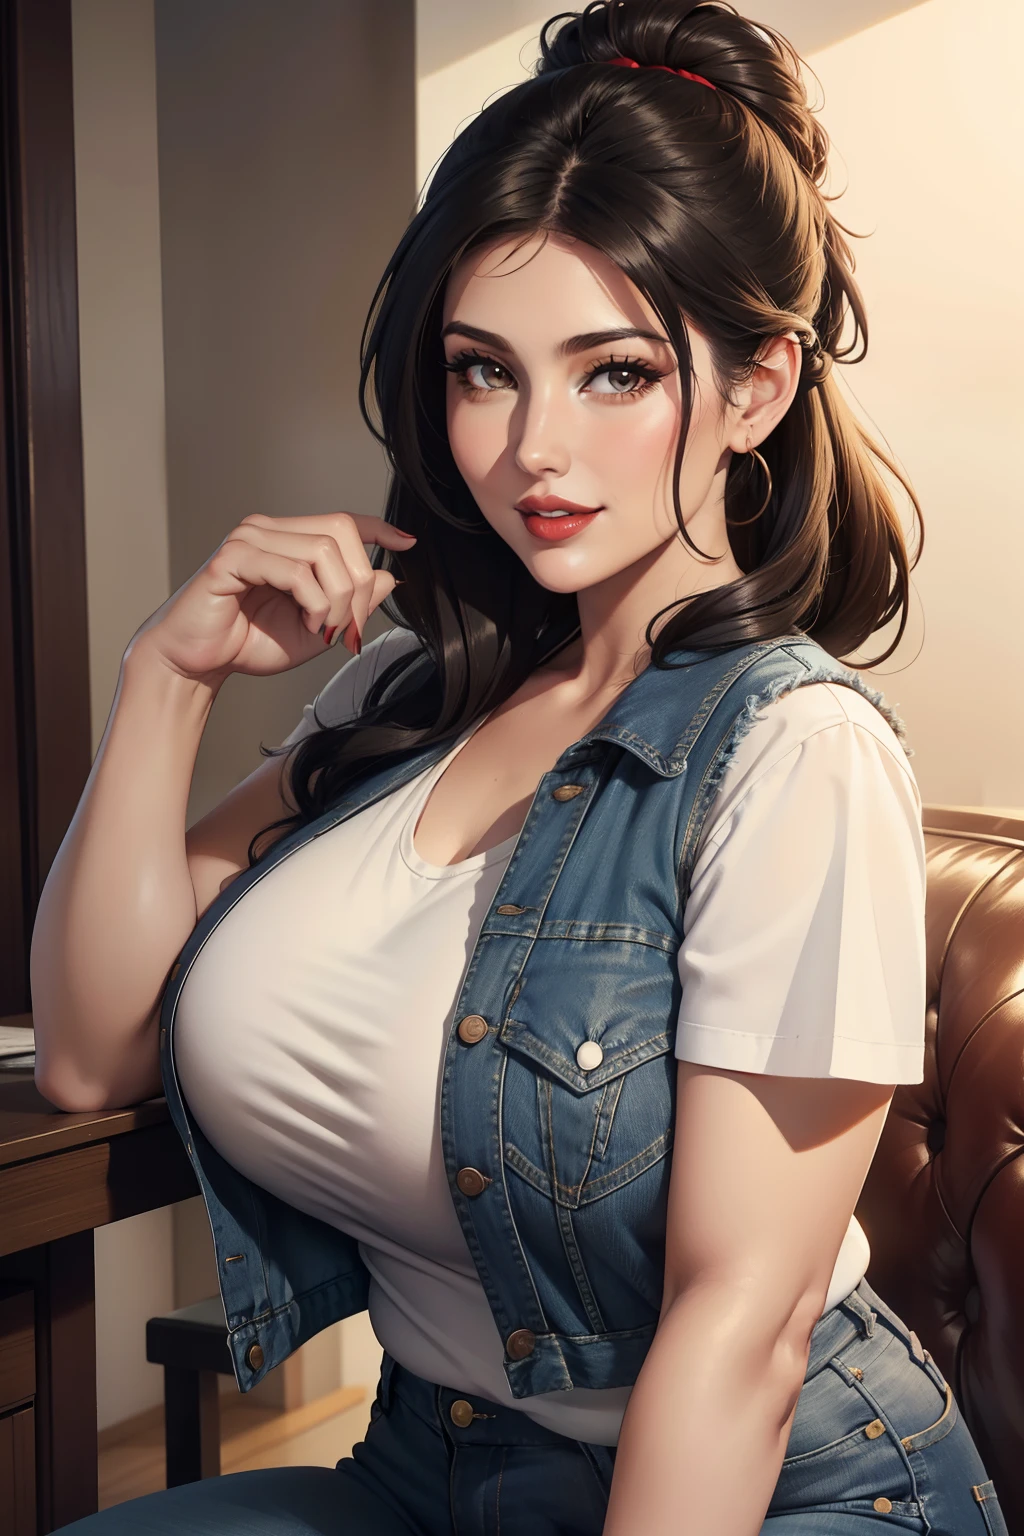 Lucy Pinder, portrait, face portrait, red lips, smiling, voluptuous, chubby woman, straight hair, black hair, hair tied in a chignon, cream t-shirt, jean vest, jeans.